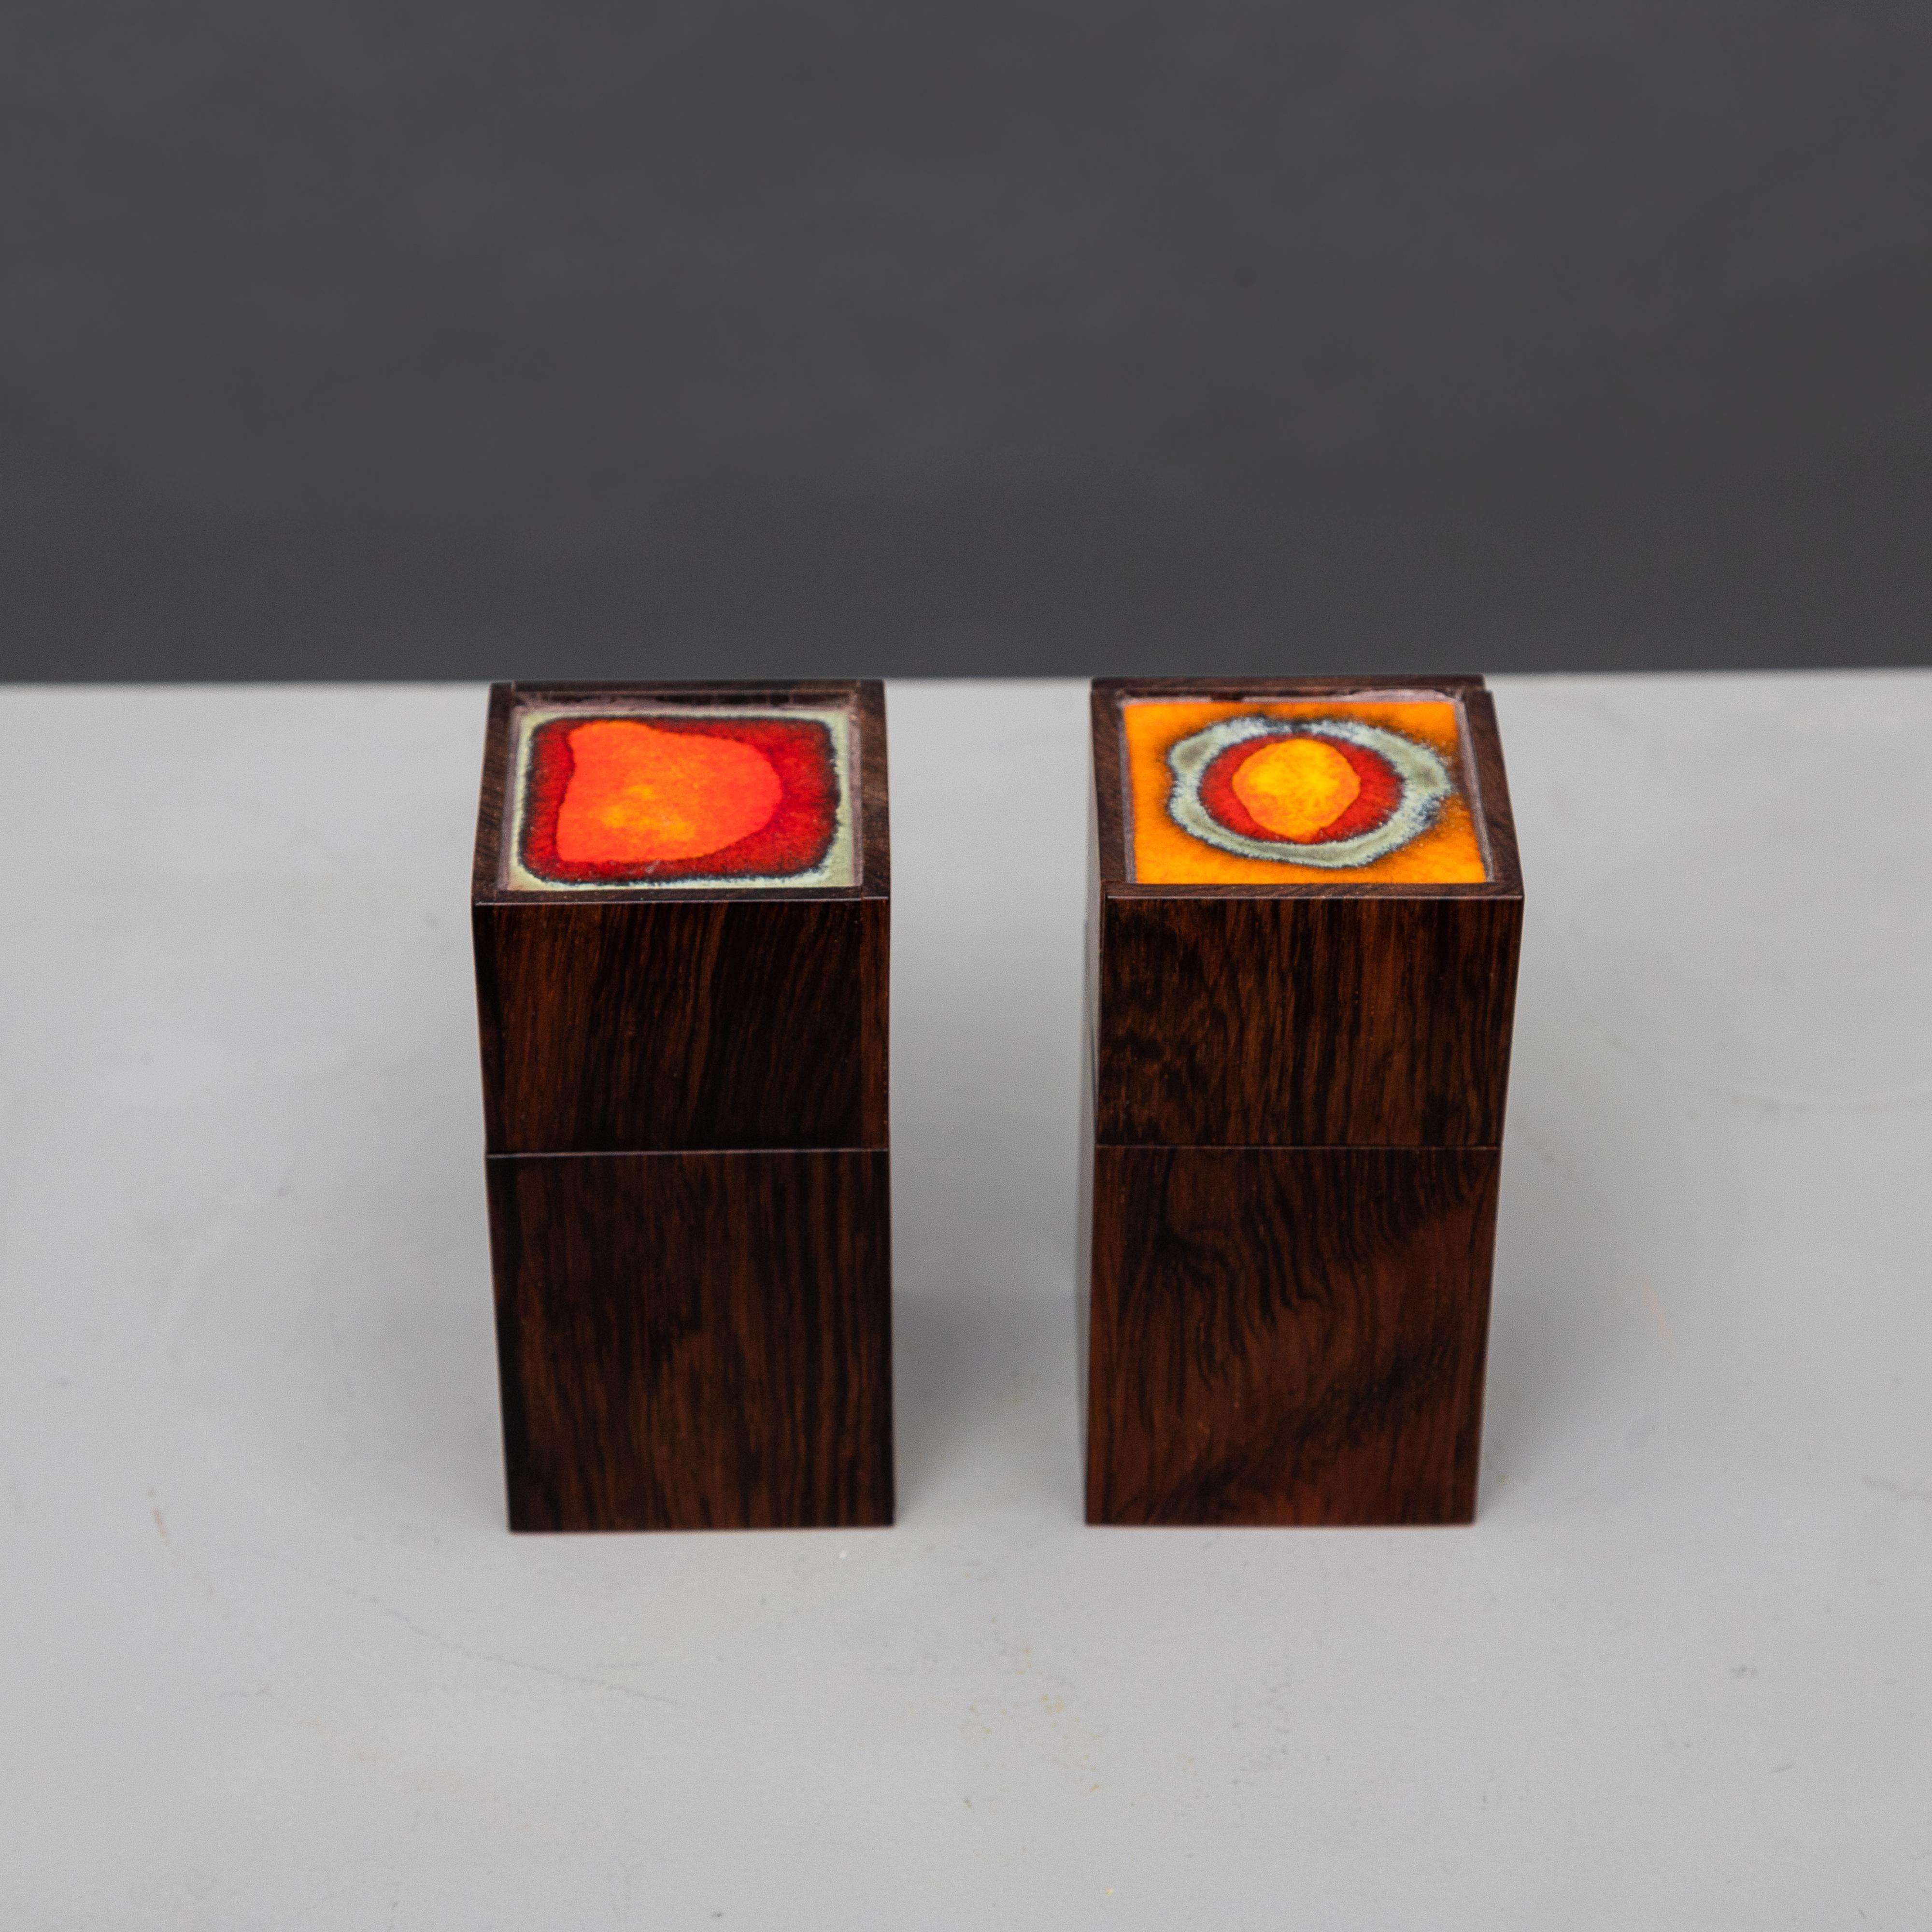 Midcentury Scandinavian Modern Klitgaard Rosewood Cigar Boxes 1960s Enameled In Good Condition For Sale In Oslo, NO